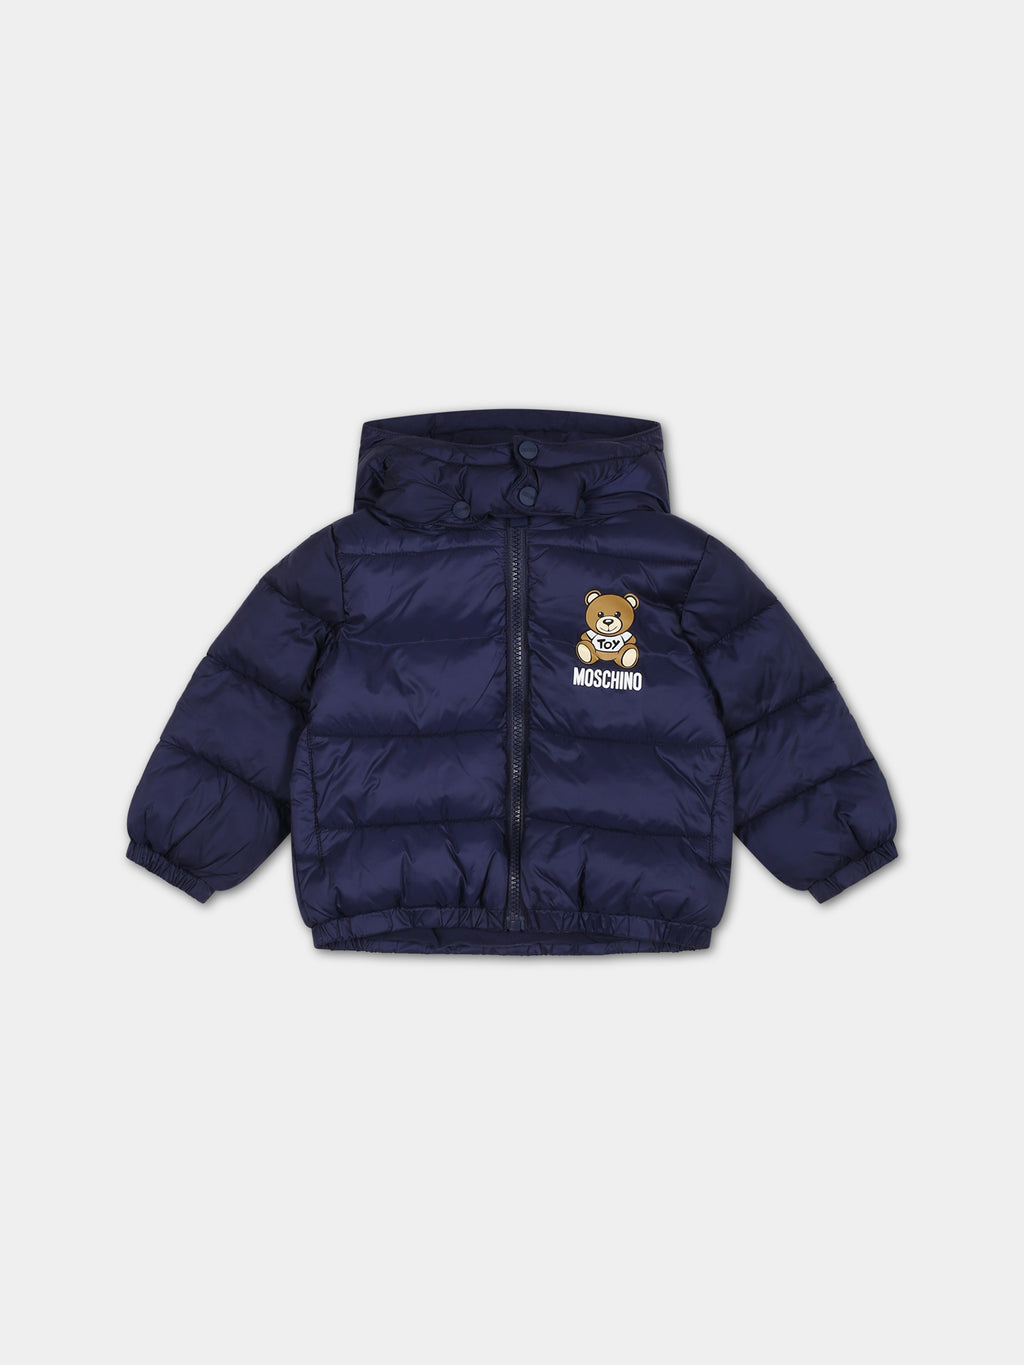 Blue jacket for baby boy with Teddy Bear and logo